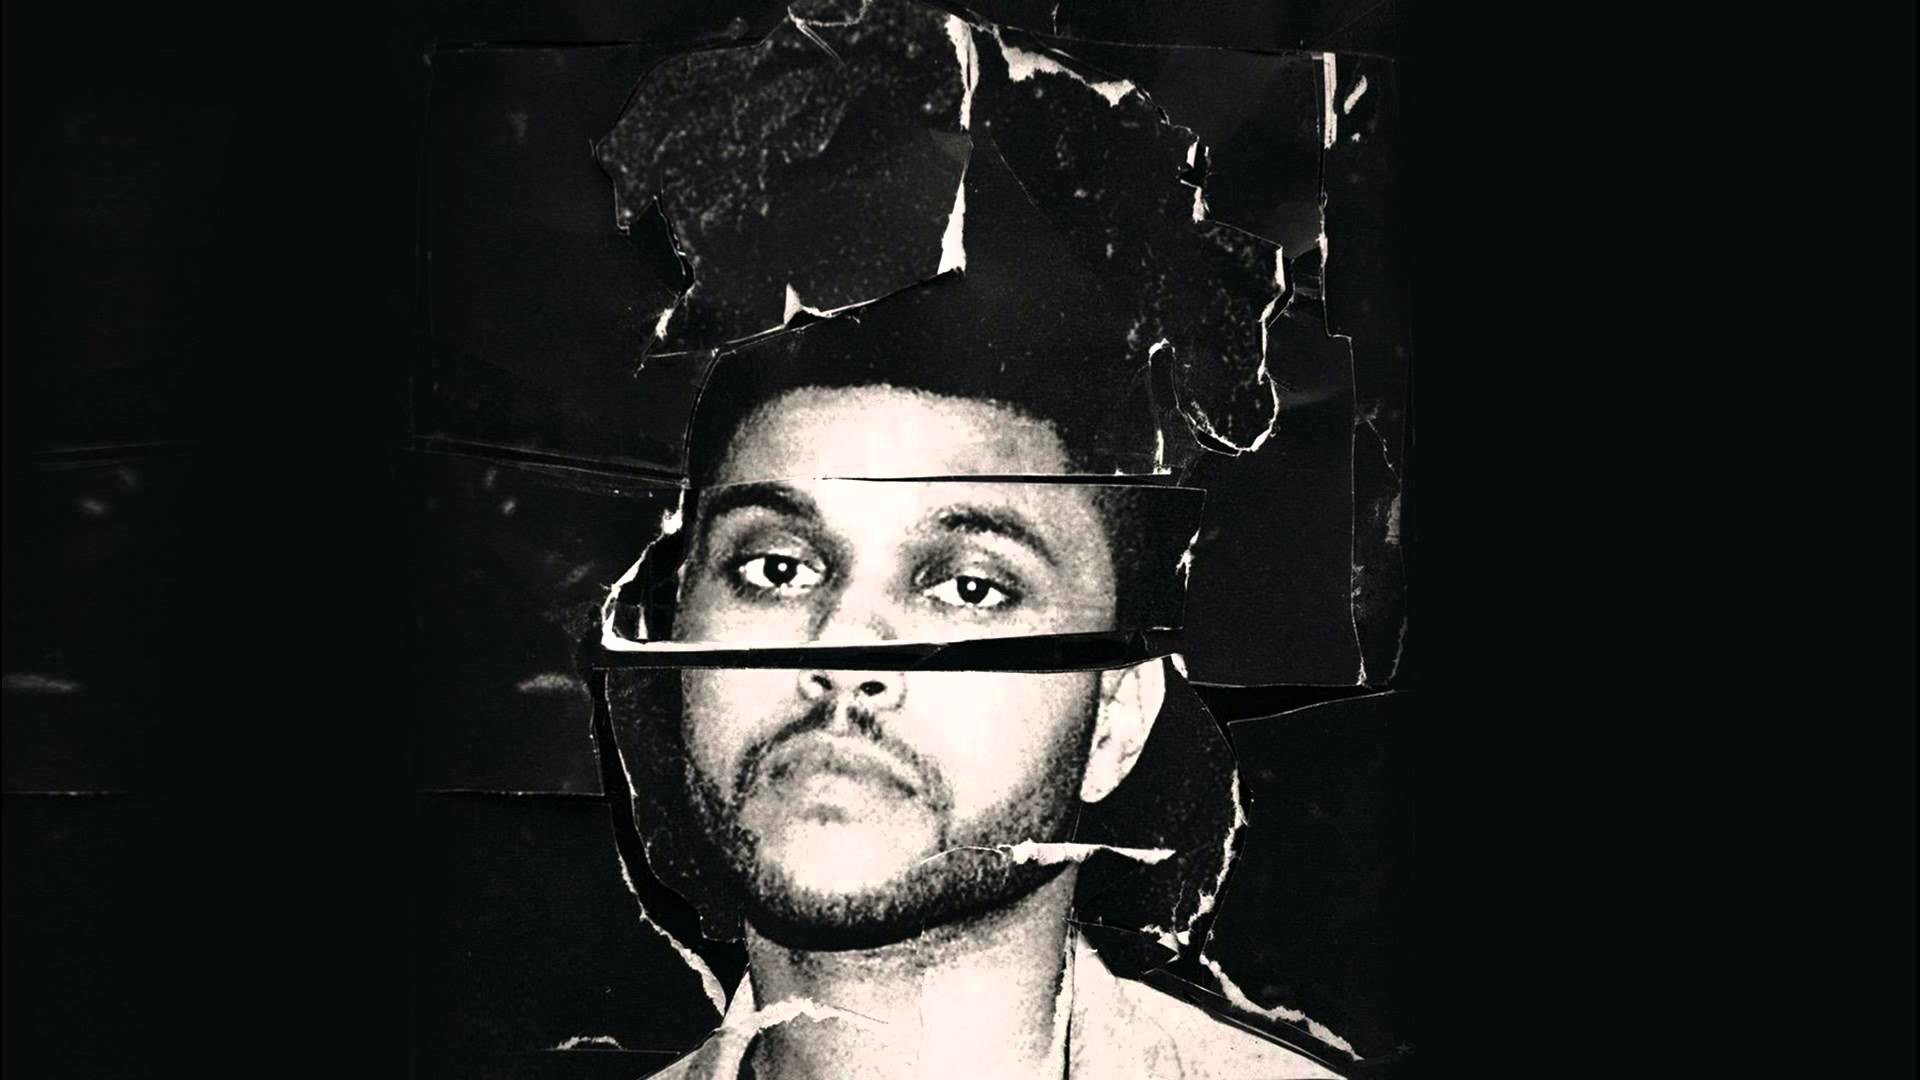 1920x1080 The Weeknd Rushed To Hospital After Reporting Partial Limb Numbness | Satyr  Magazine